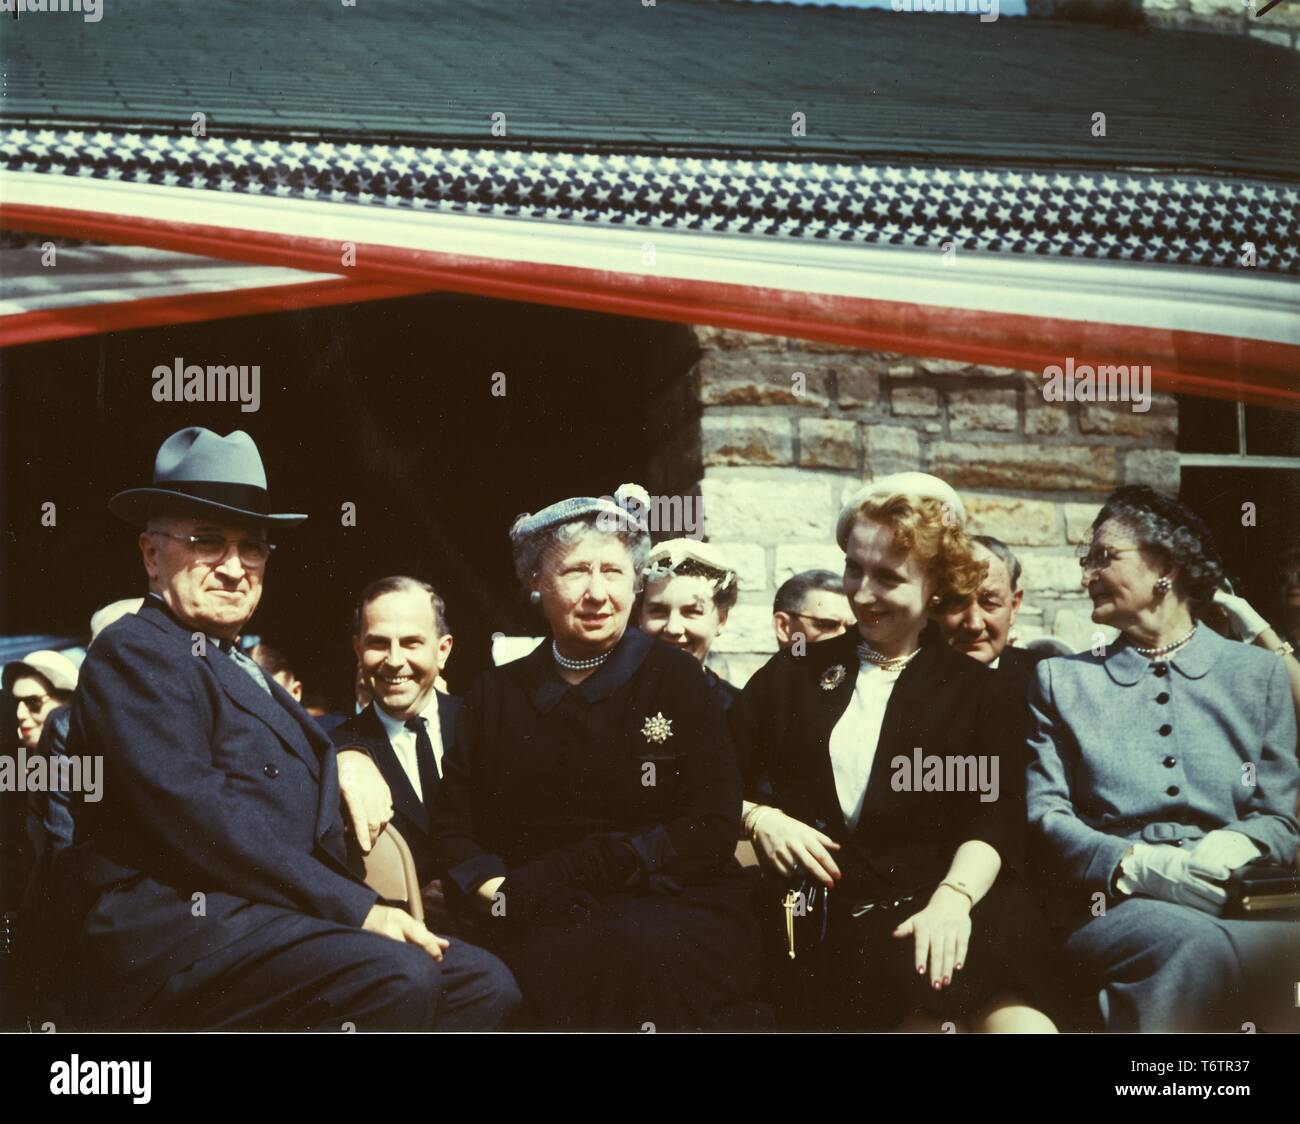 Former President Harry S Truman, Bess Truman (first lady to President Truman), Margaret Truman (the first daughter), and Mary Jane Truman (President Truman's sister) at the ground breaking ceremonies for the Harry S Truman Library, Independence, Missouri, May 8, 1955. Image courtesy National Archives. () Stock Photo